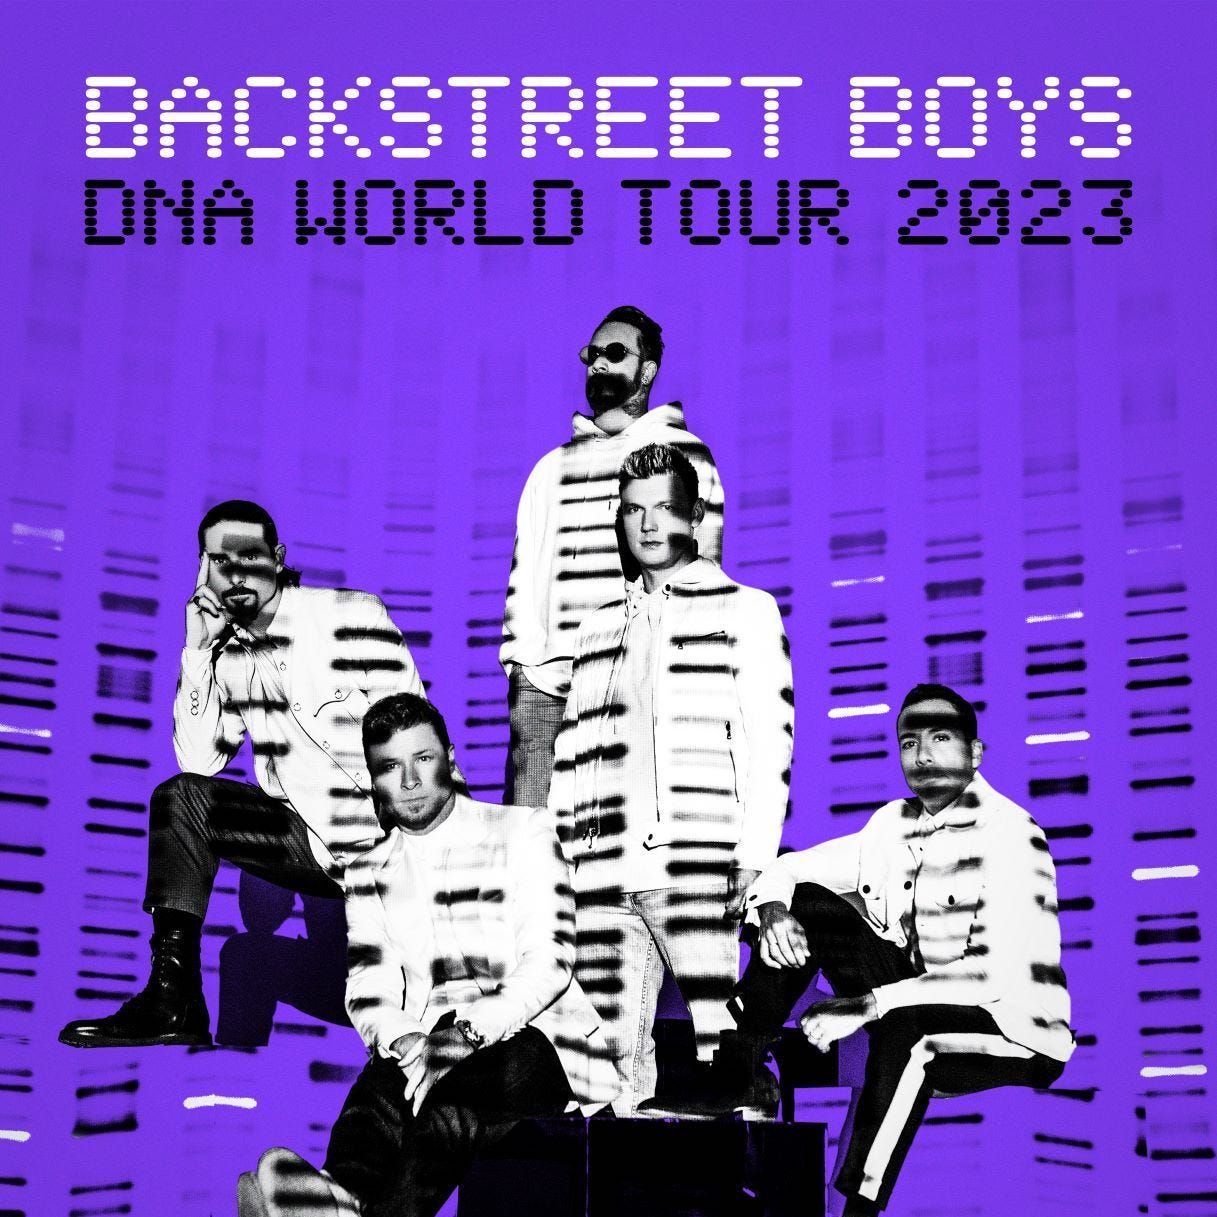 Backstreet Boys to perform live in Singapore with DNA World Tour 2023